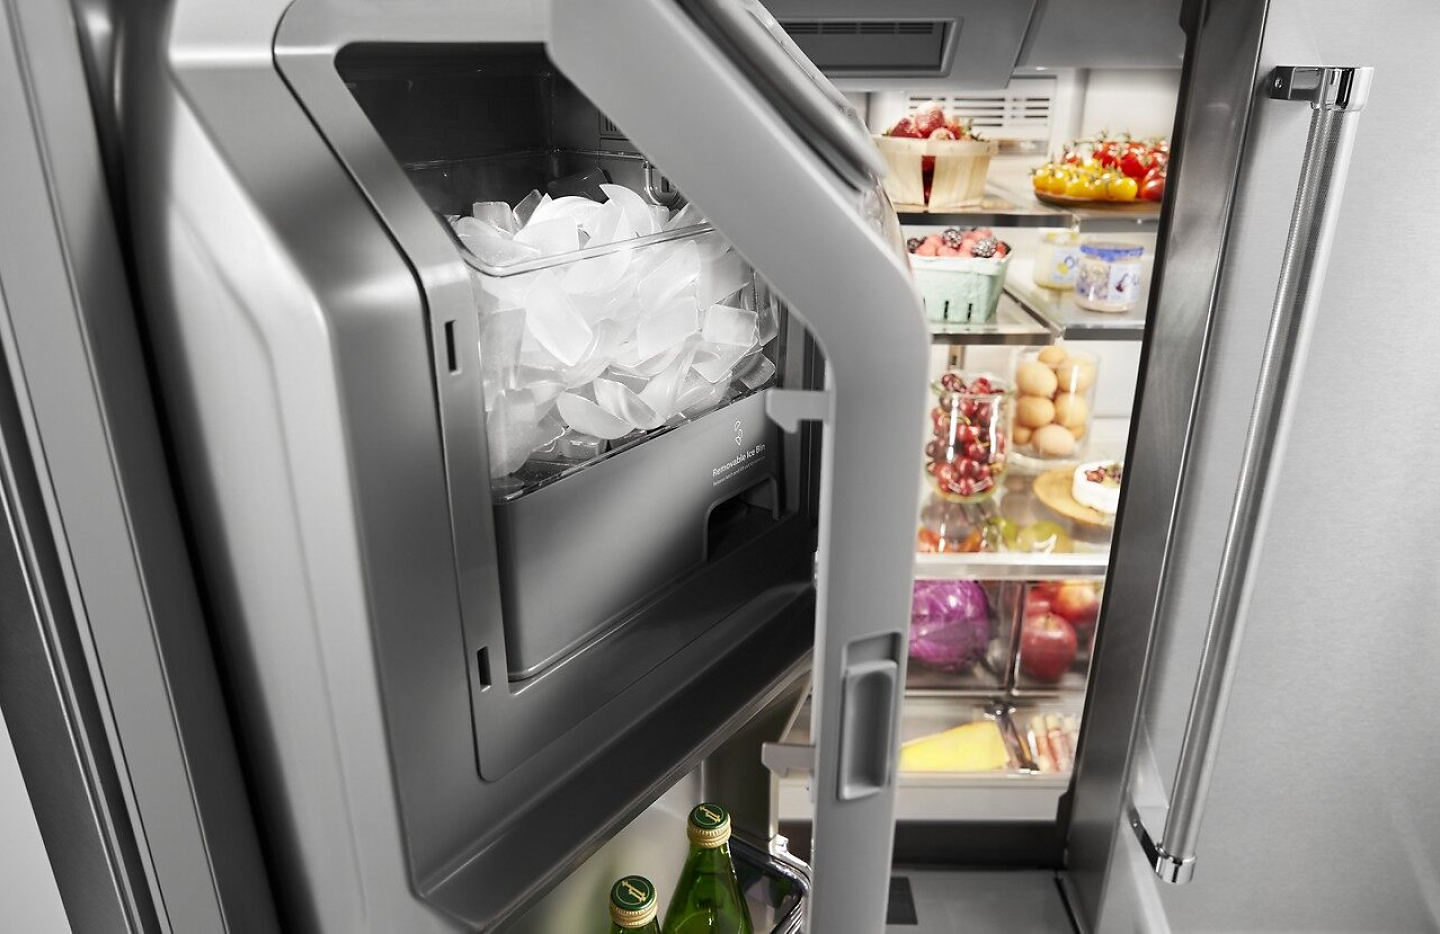 The freezer ice box compartment of a French door refrigerator